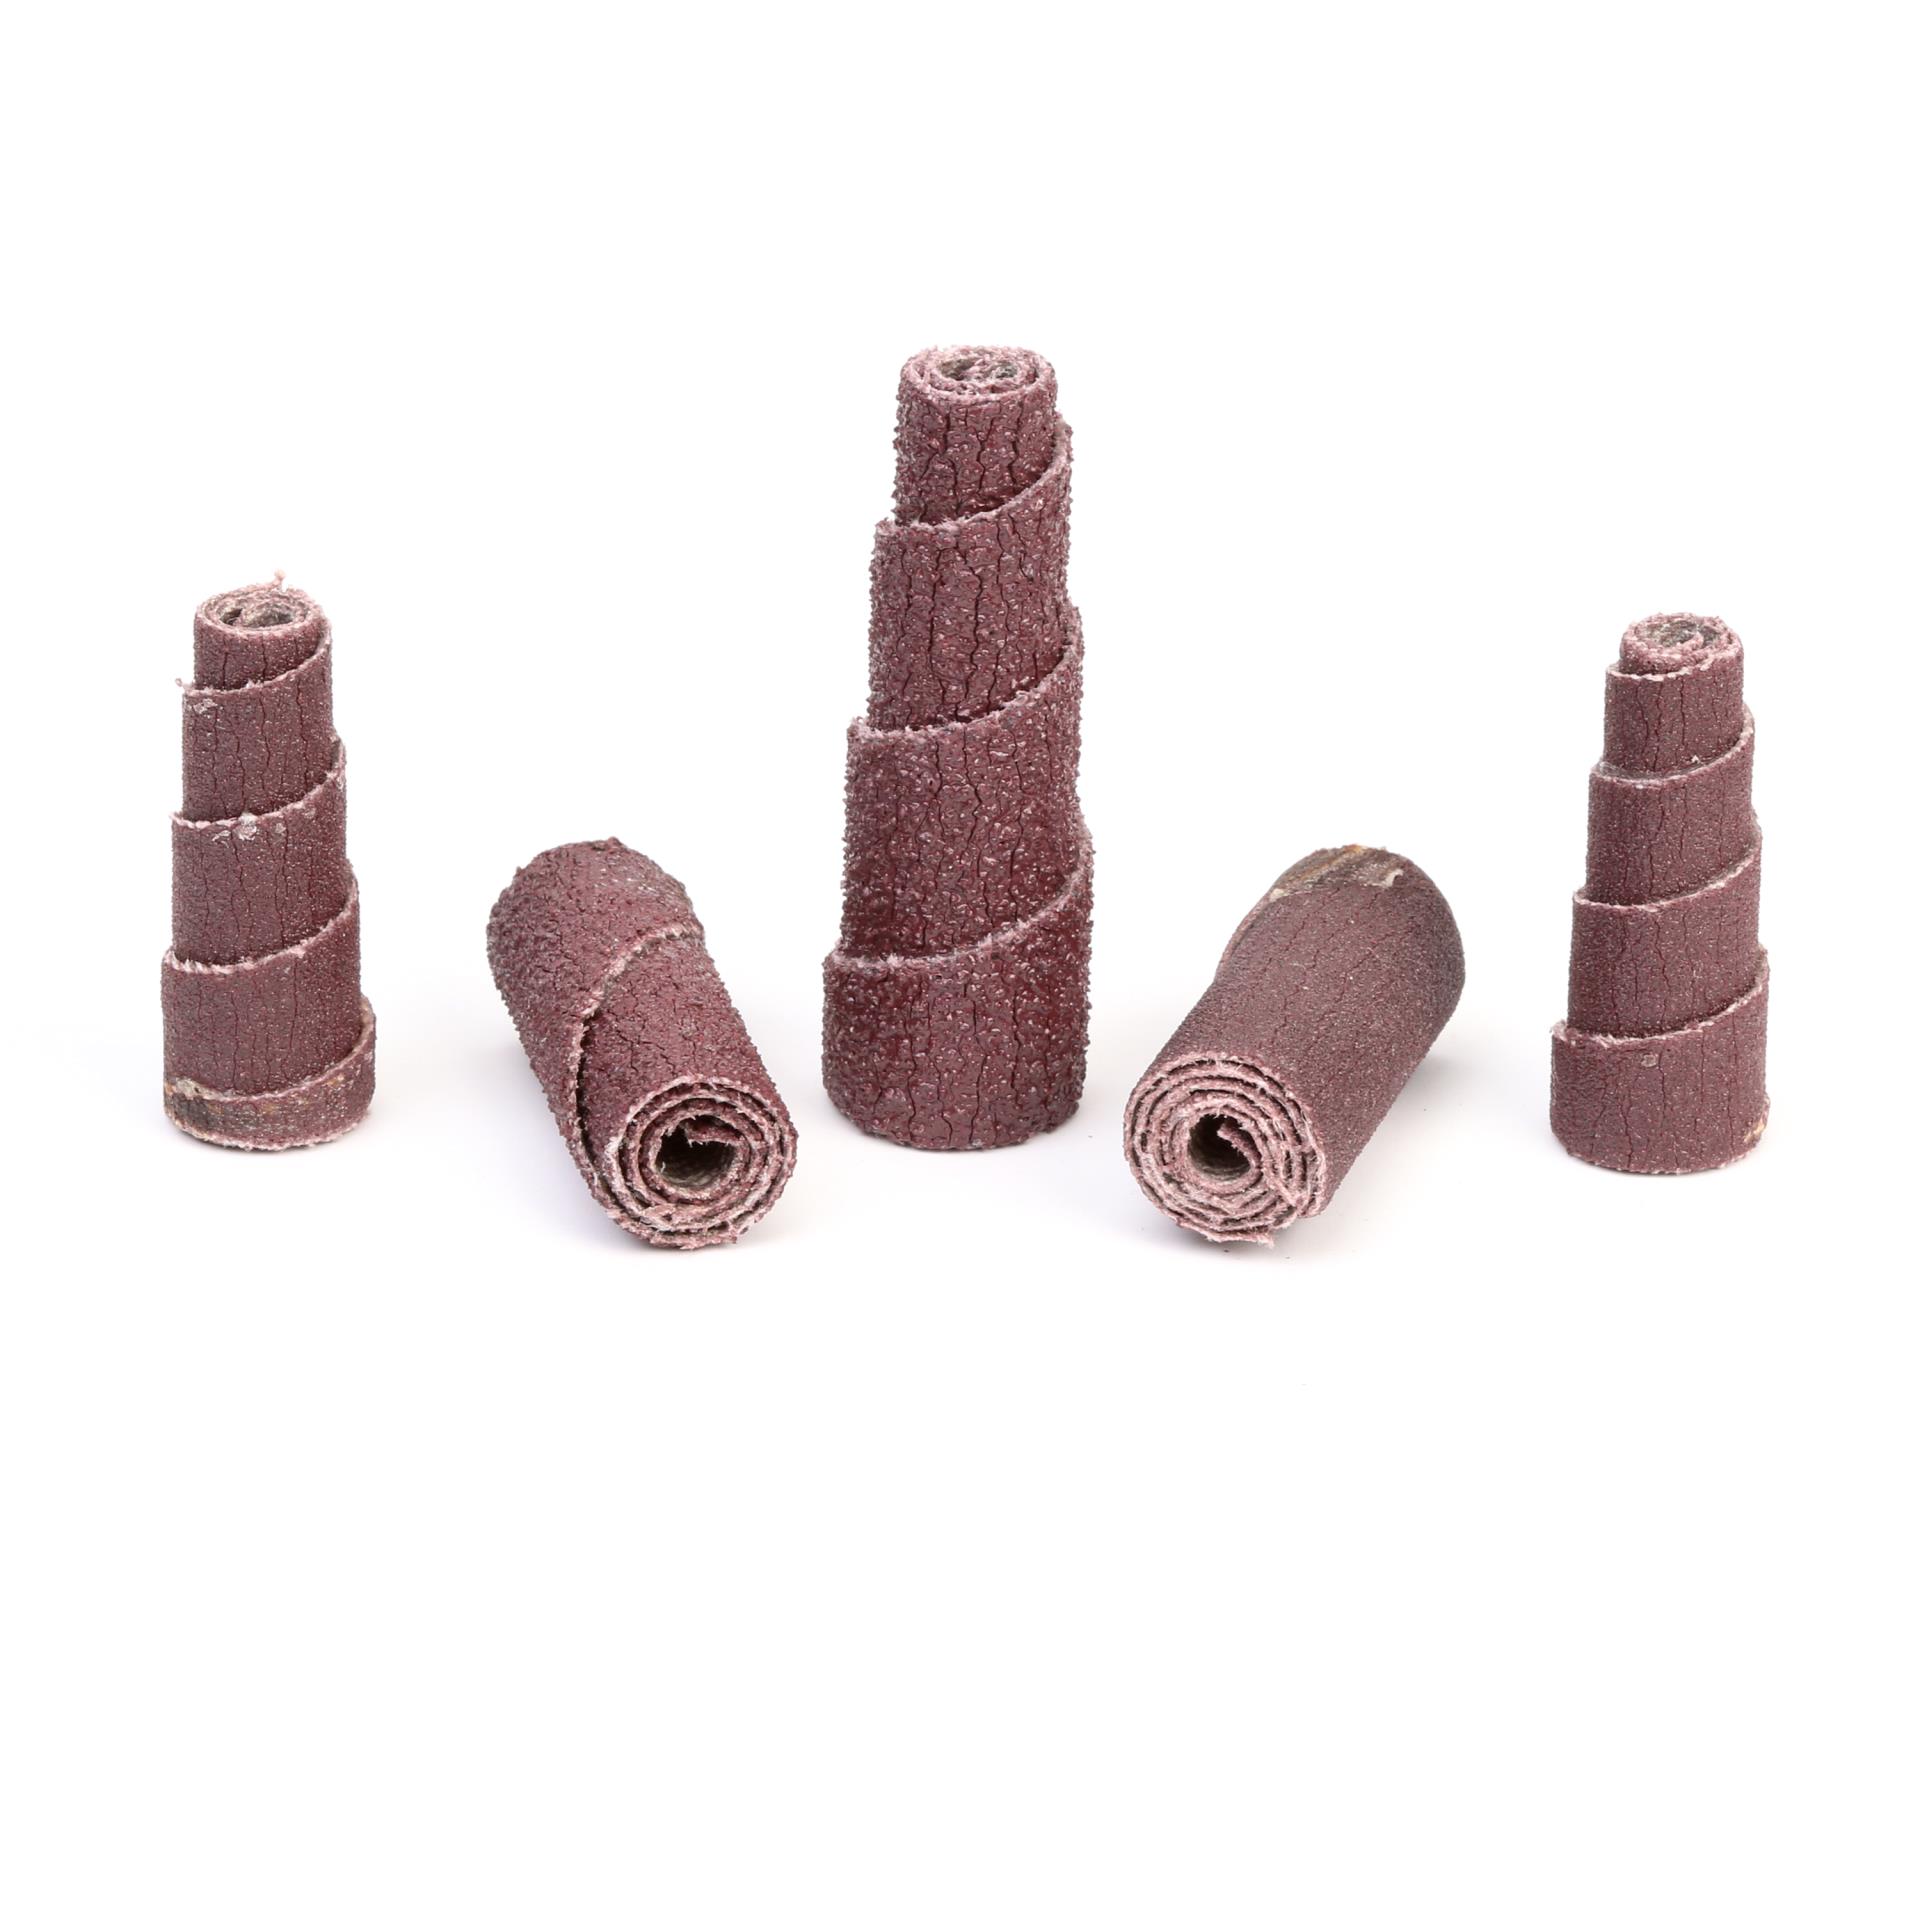 00076308650278 3M™ Cartridge Roll 341D, P120 X-weight, 5/8 in x in x  3/16 in, 100 per case Aircraft products cartridge-rolls 9337197